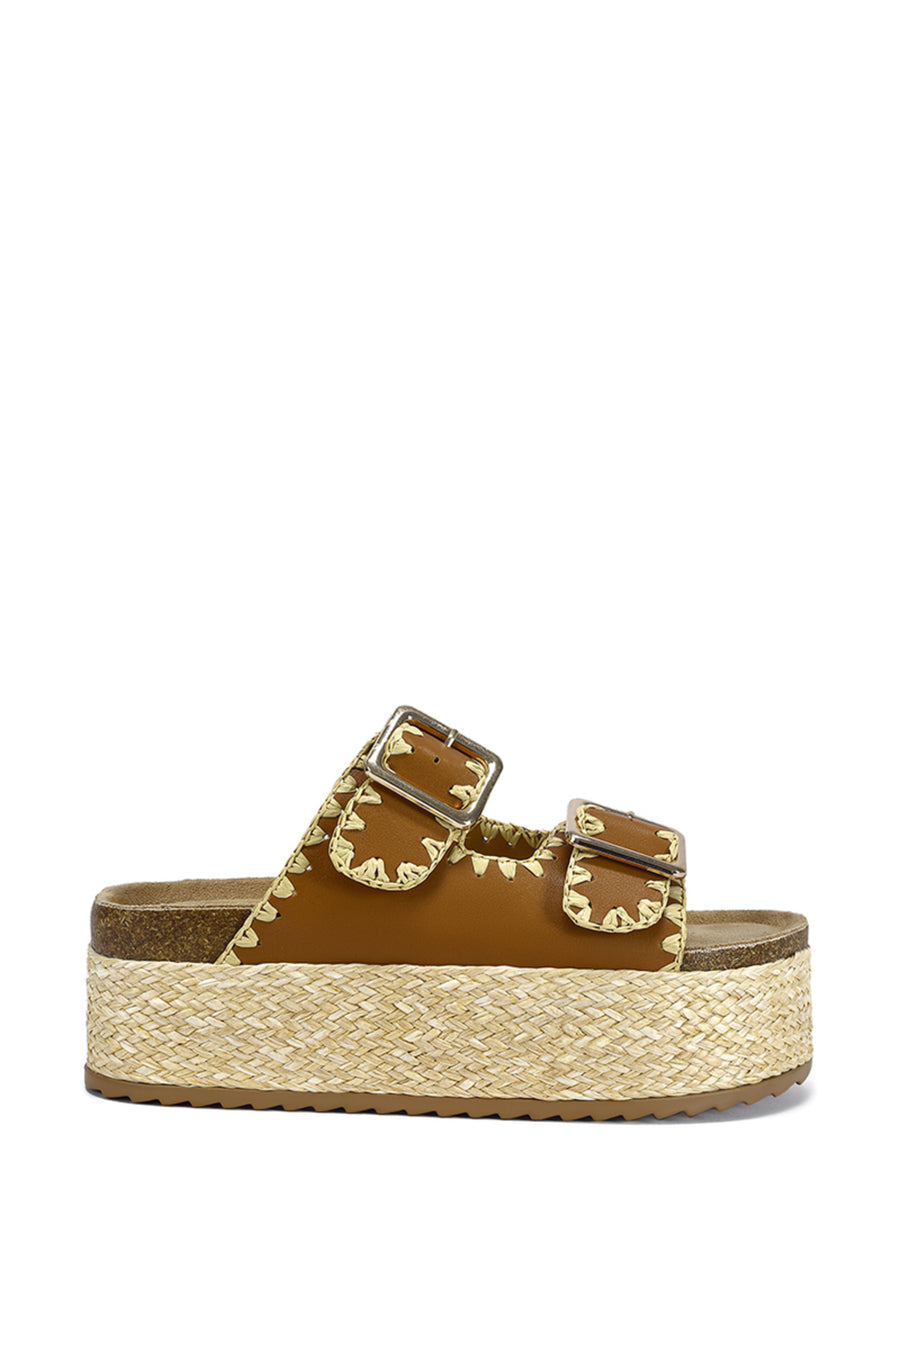 brown platform flat sandals with braided raffia along the sole and buckled double straps